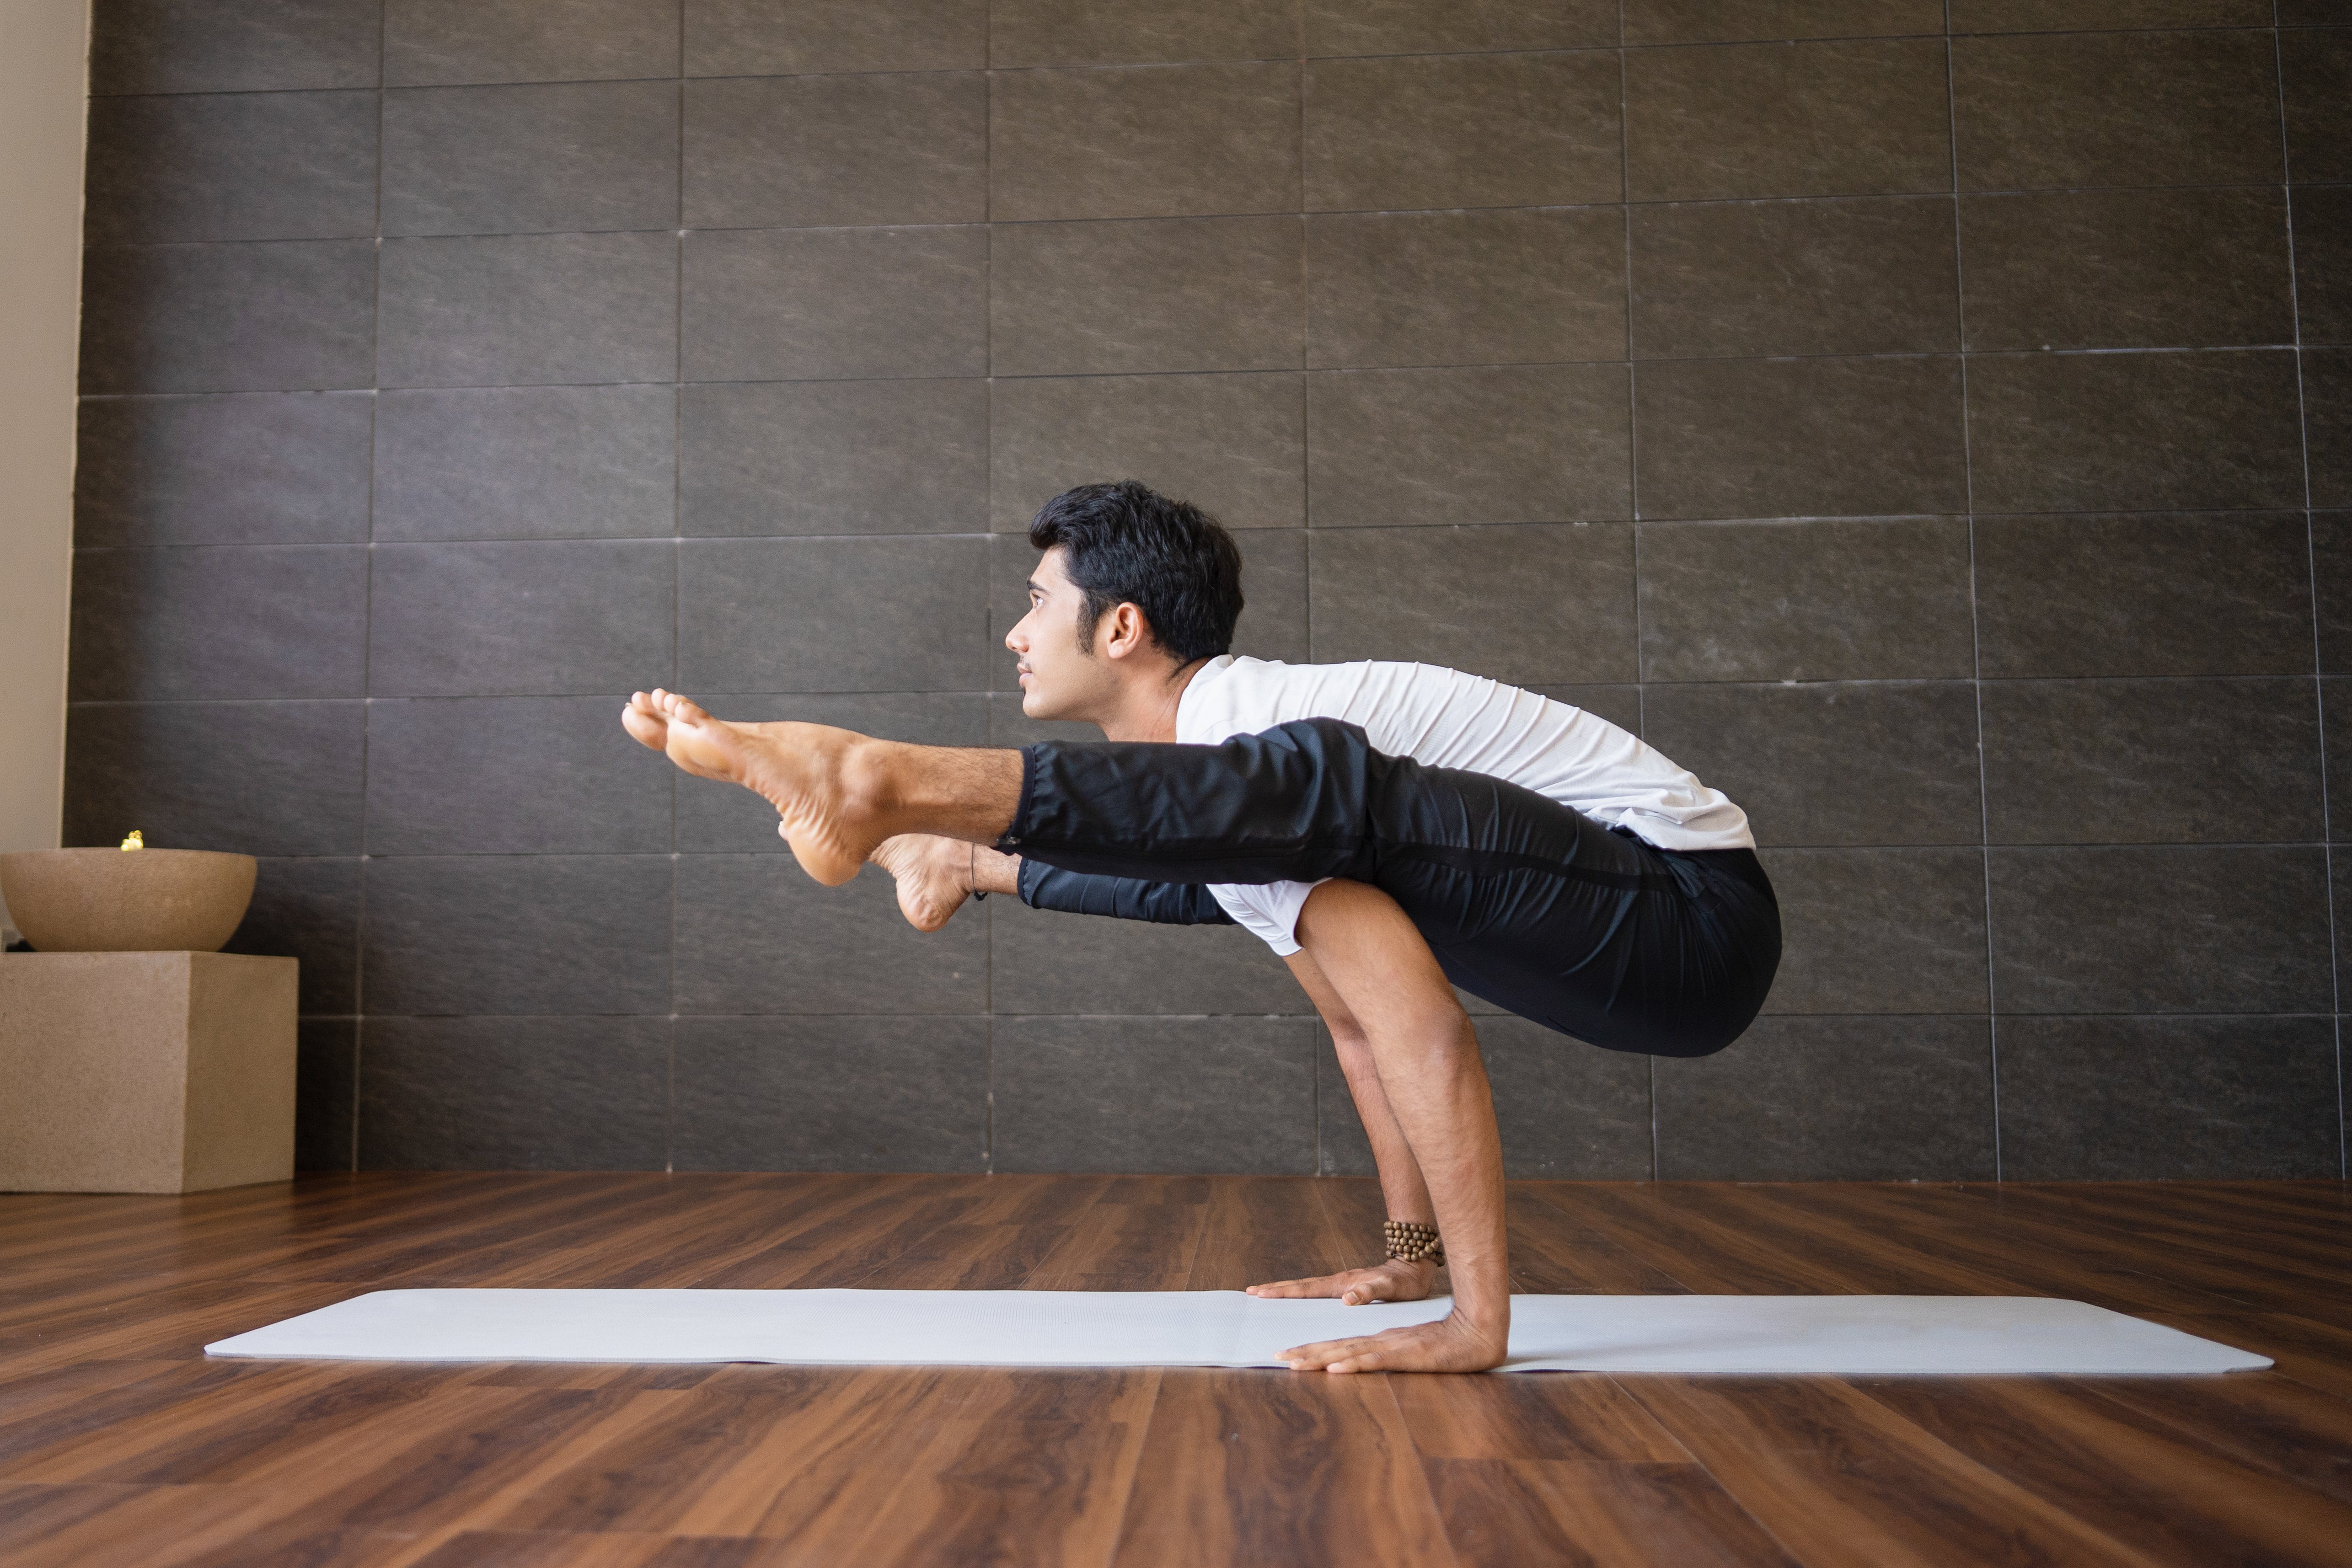 What's the hardest yoga pose? 5 challenging yoga exercises to try